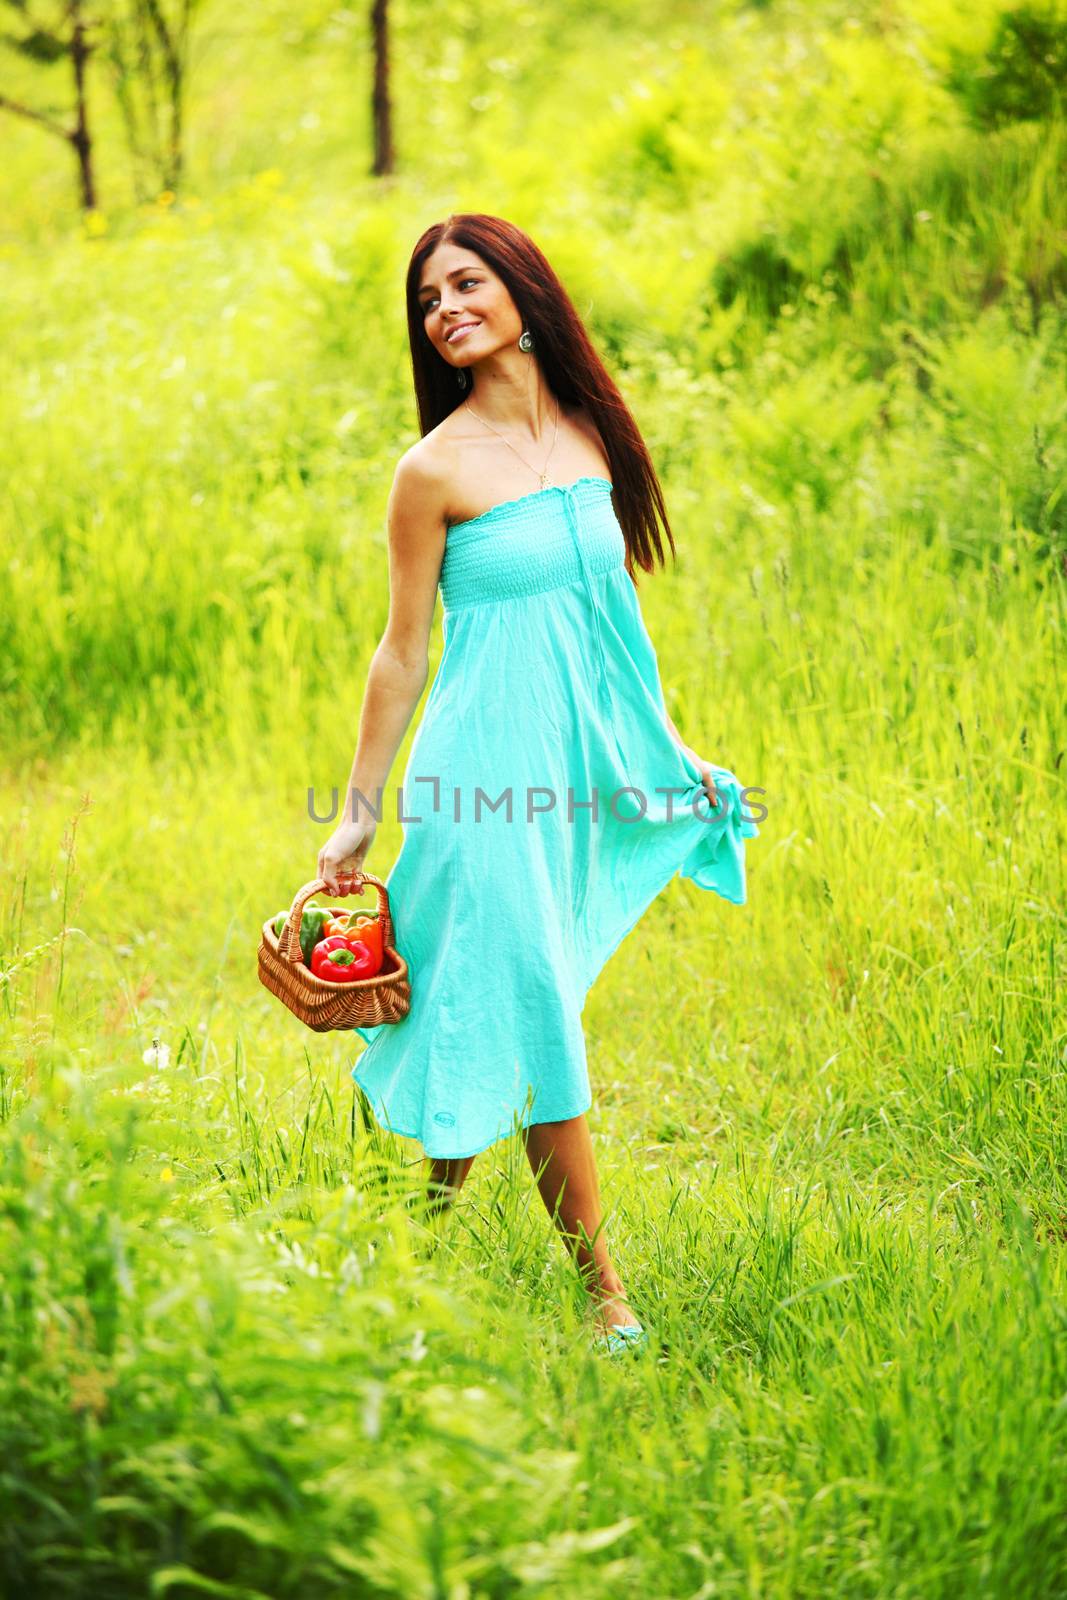 Beautiful young woman walking on summer grass field with basket of paprica